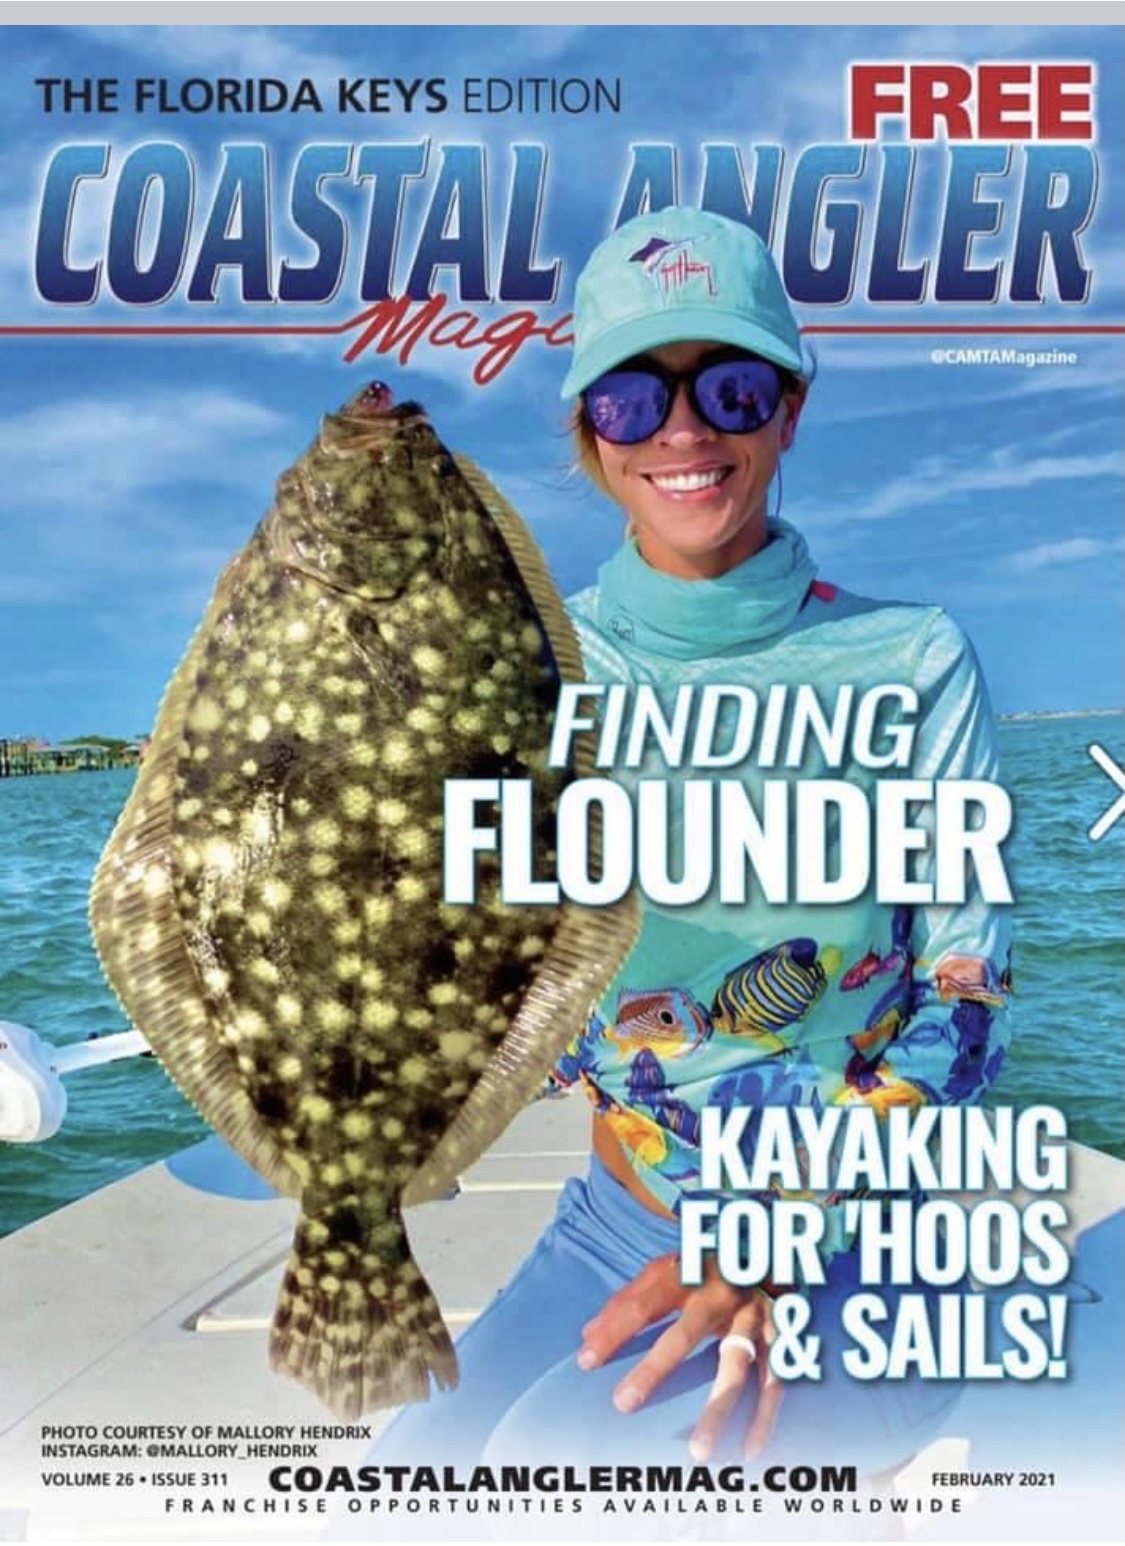 March 2021 Coastal Angler Magazine article by Captain Quinlyn Haddon